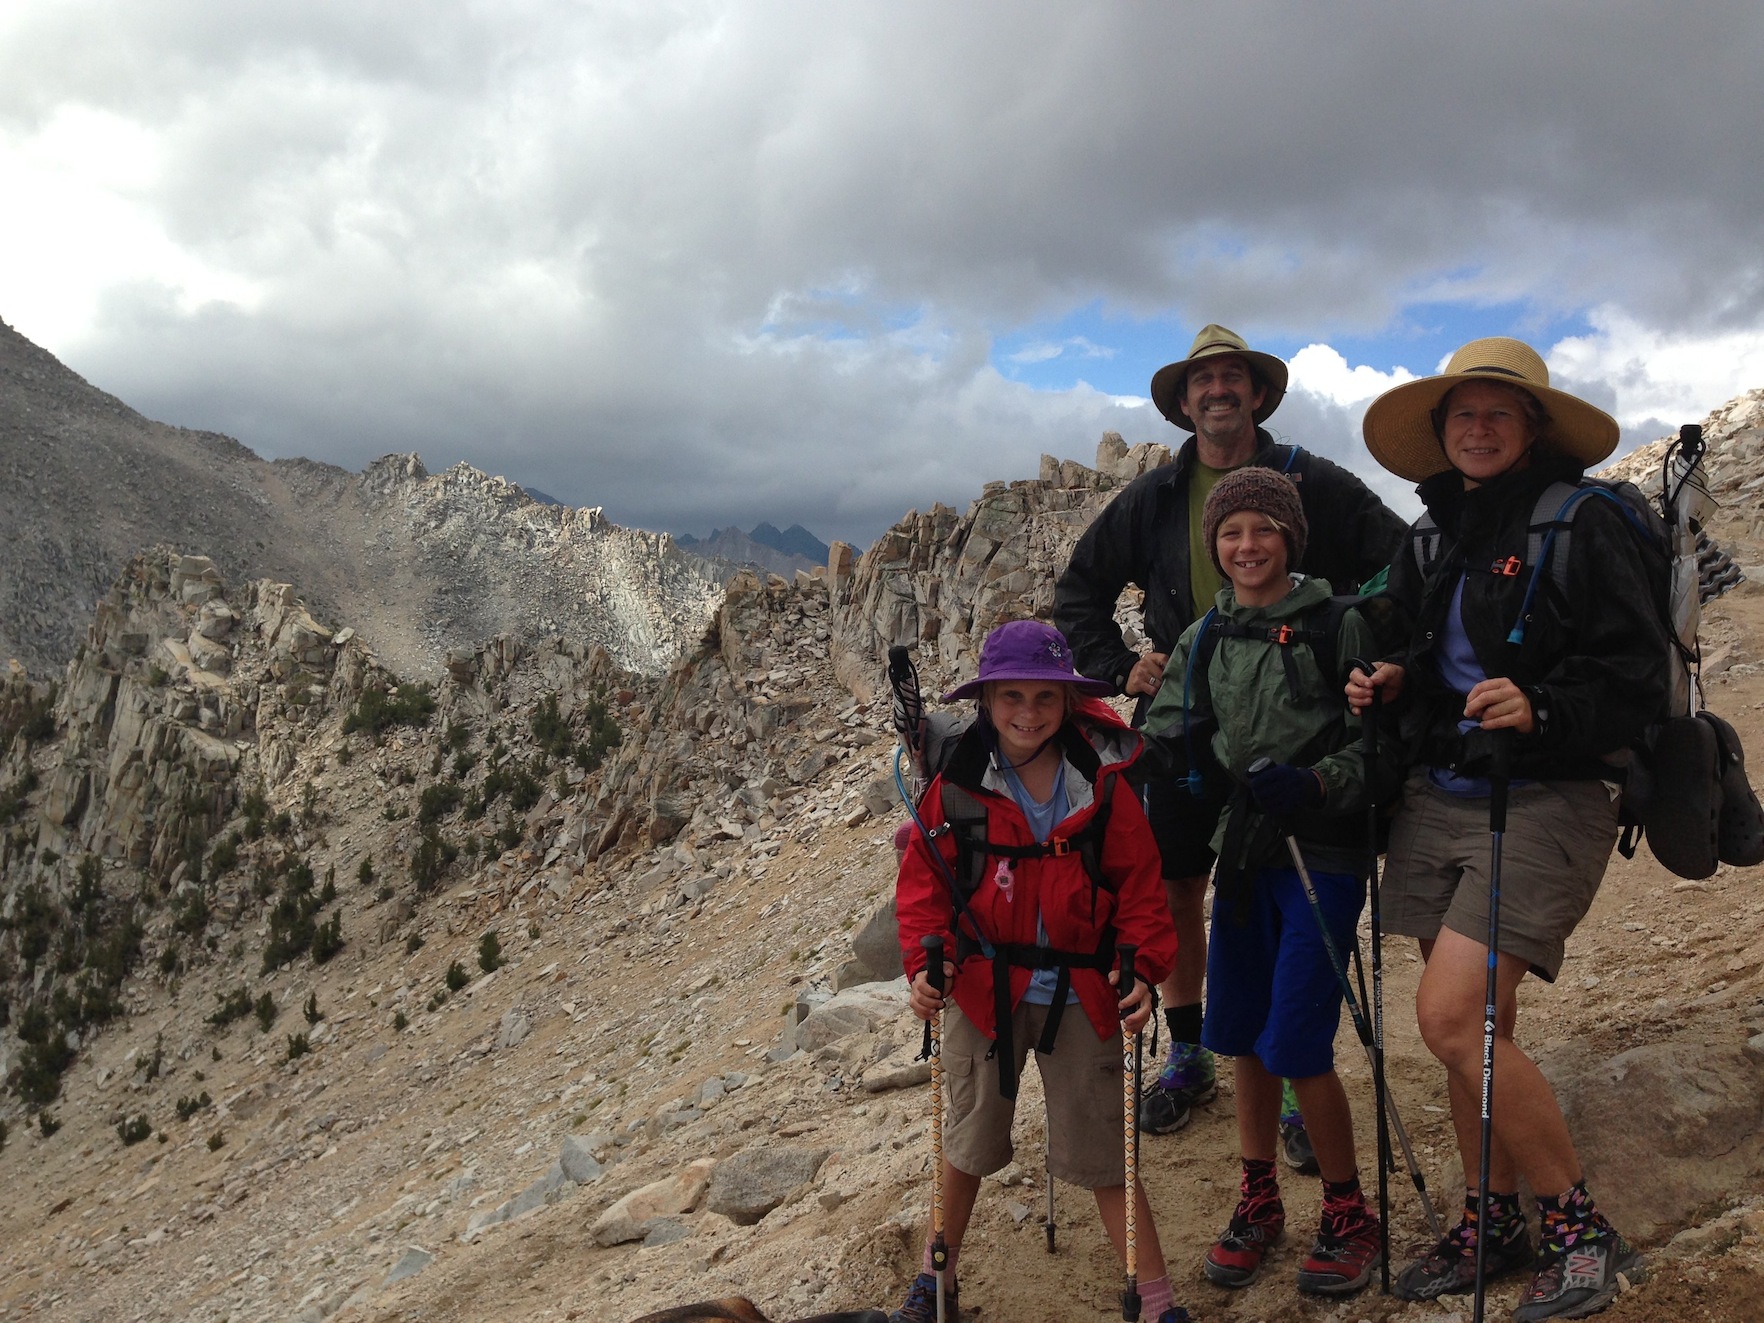 The Umstead family near the top of Kearsarge Pass on their way down to the Base Camp to resupply and recharge. This is their second JMT -- NOBO this time!